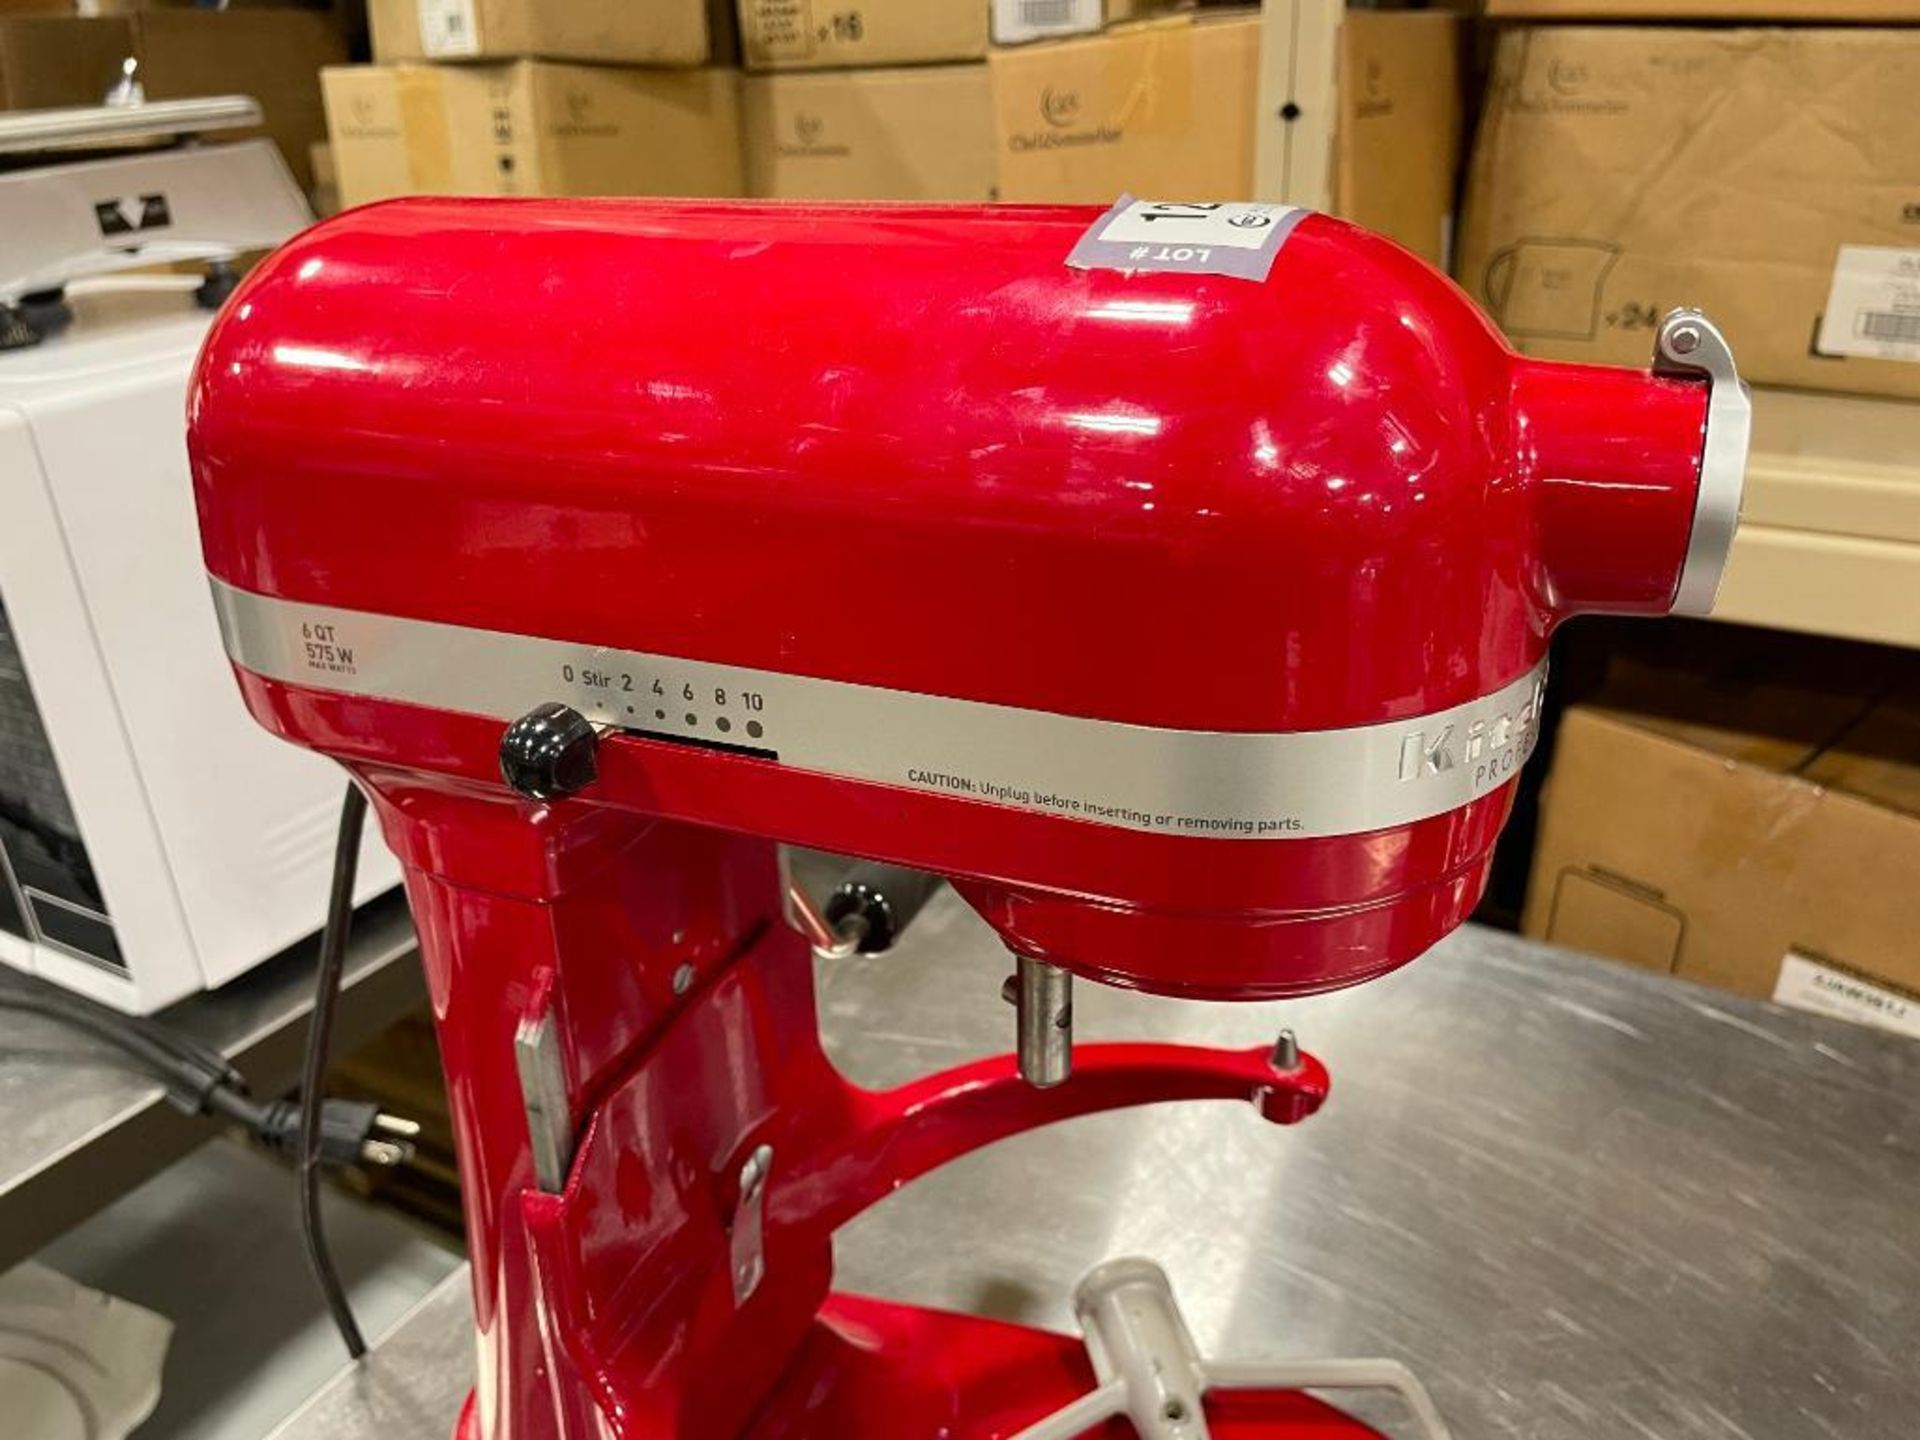 KITCHENAID PROFESSIONAL 600 SERIES 6-QUART BOWL-LIFT STAND MIXER WITH ATTACHMENTS - Image 2 of 12